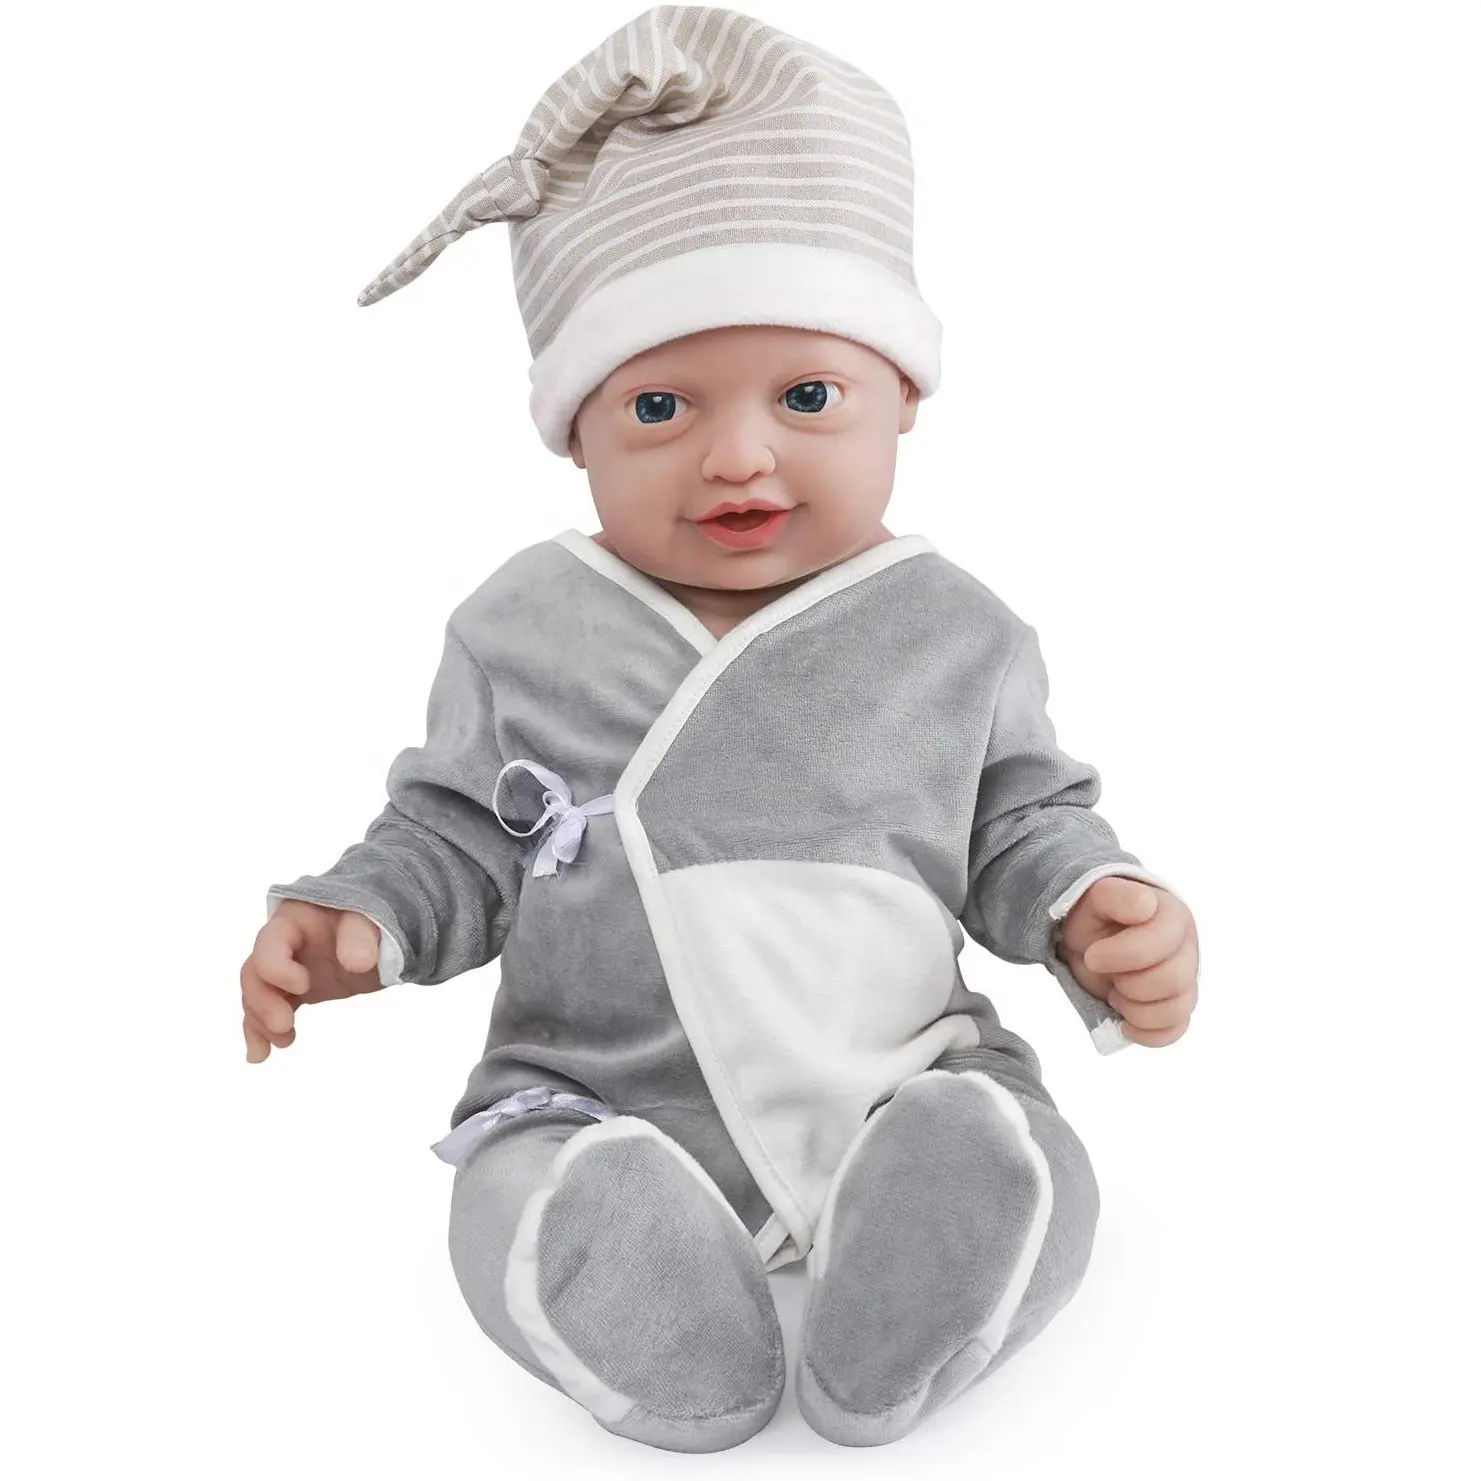 23 inch realistic full body solid silicone reborn baby doll wholesale